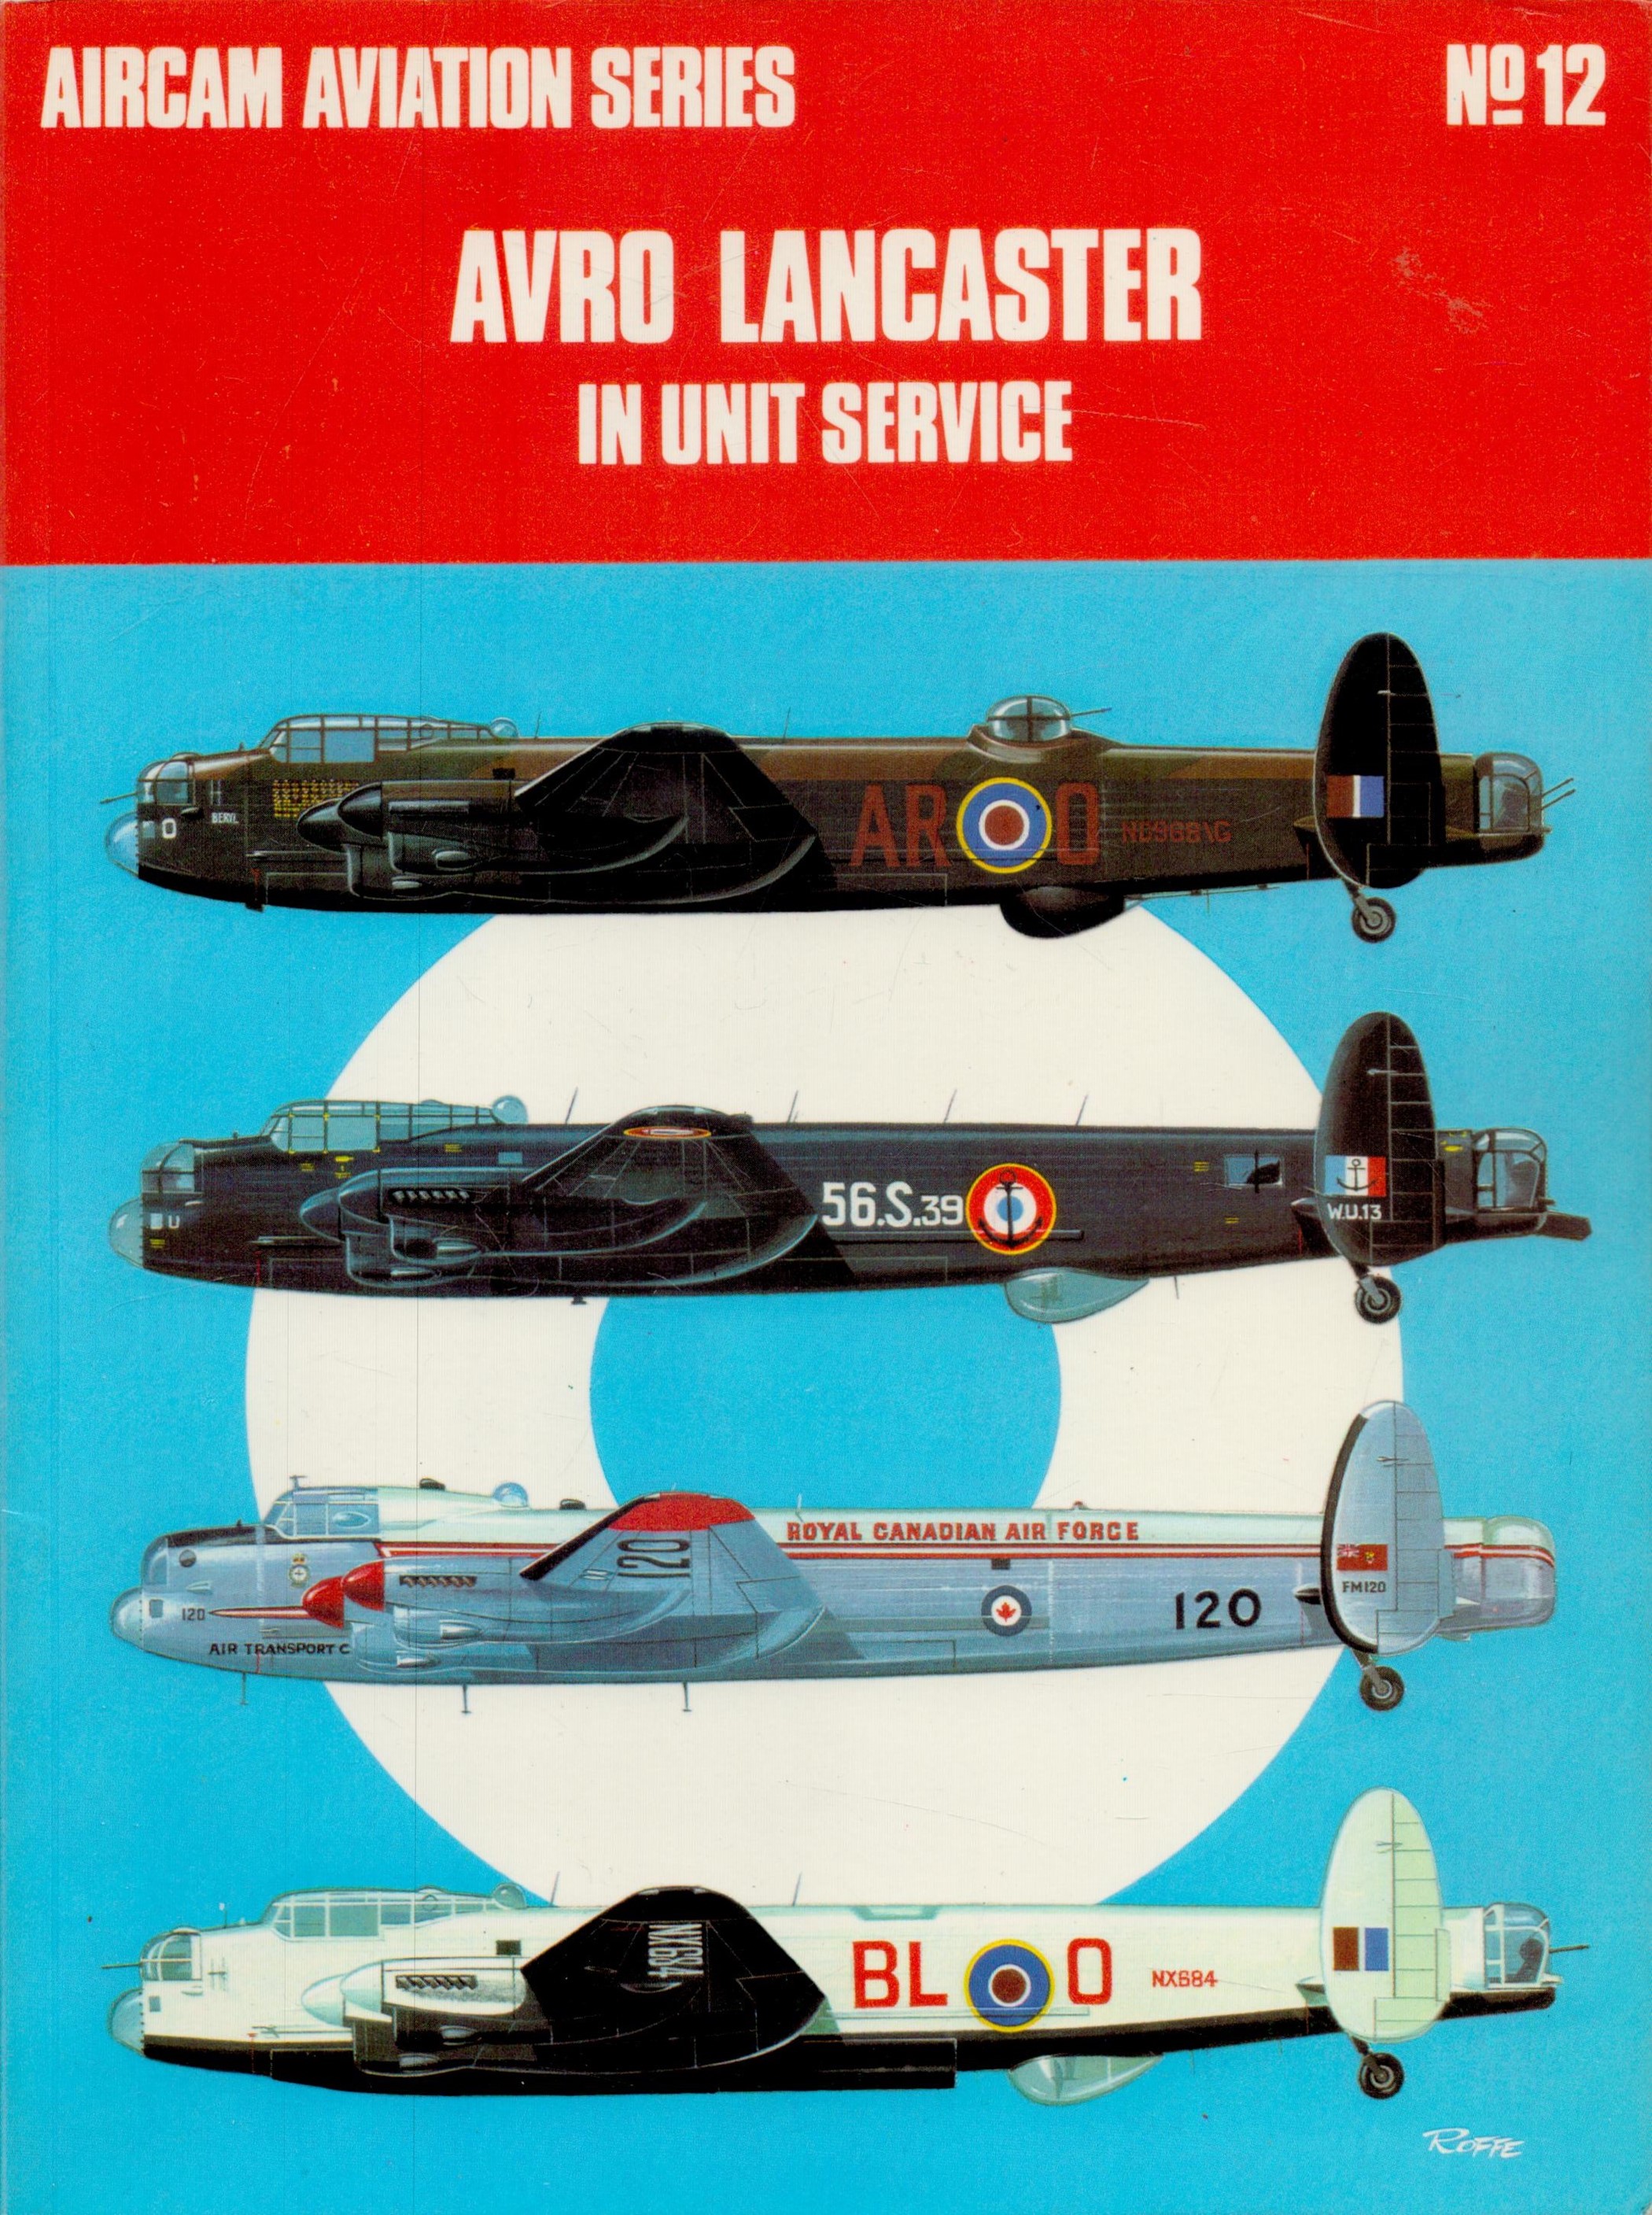 Mike Garbett and Brian Goulding Paperback book titled Avro Lancaster In Unit Service. An Aircam